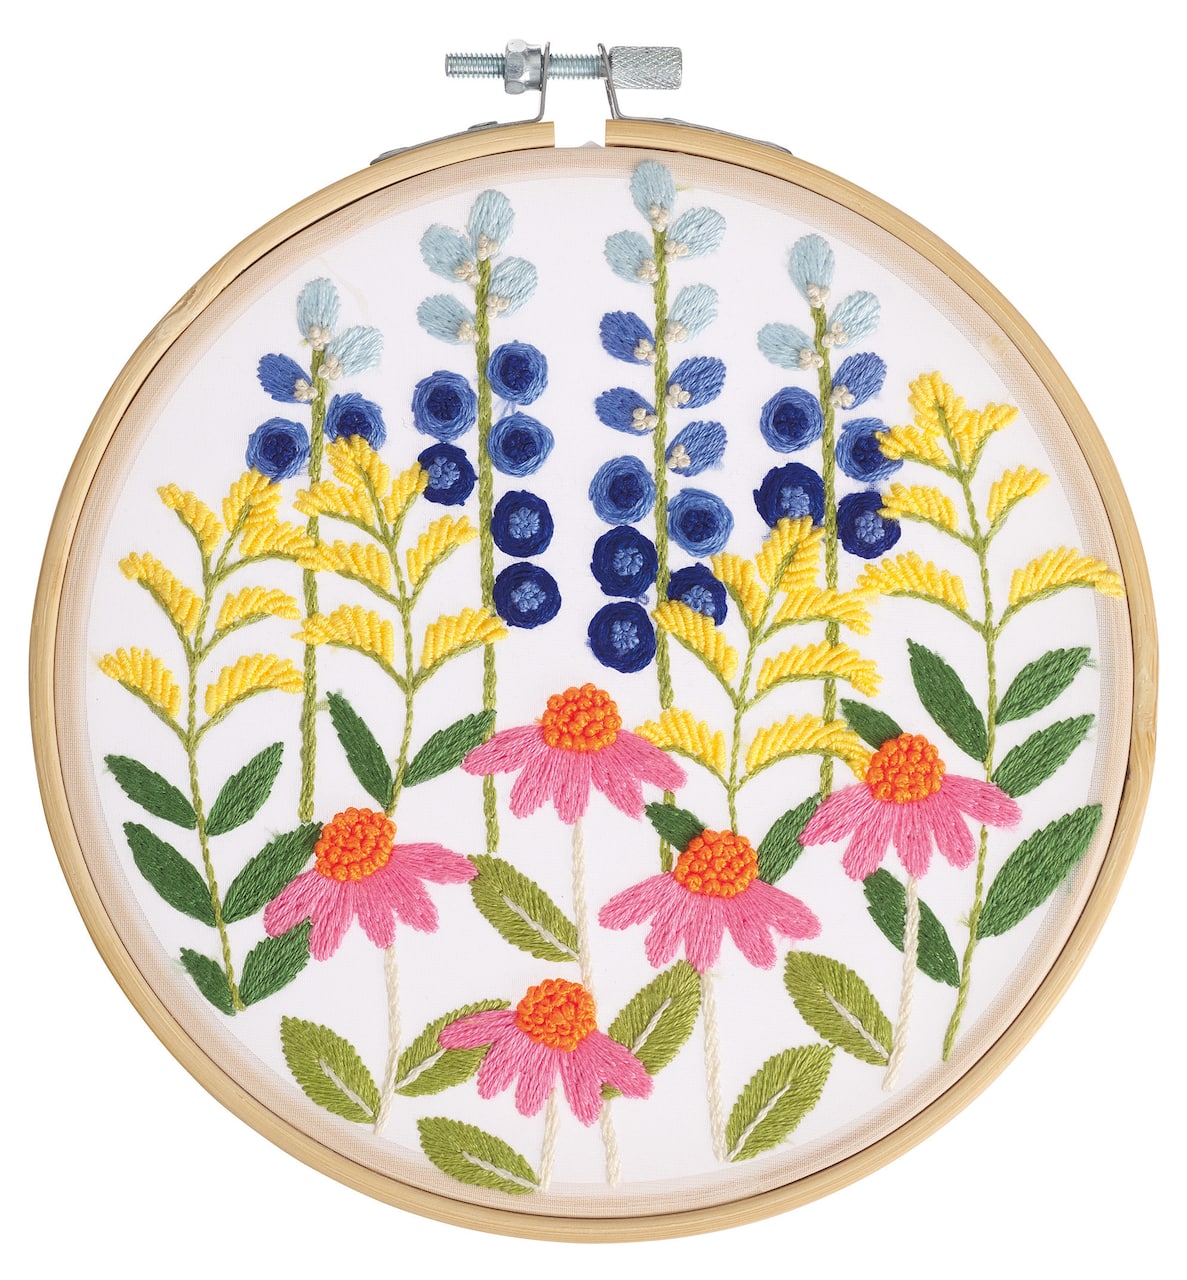 8 Wildflowers Stamped Design Embroidery Kit by Loops & Threads®